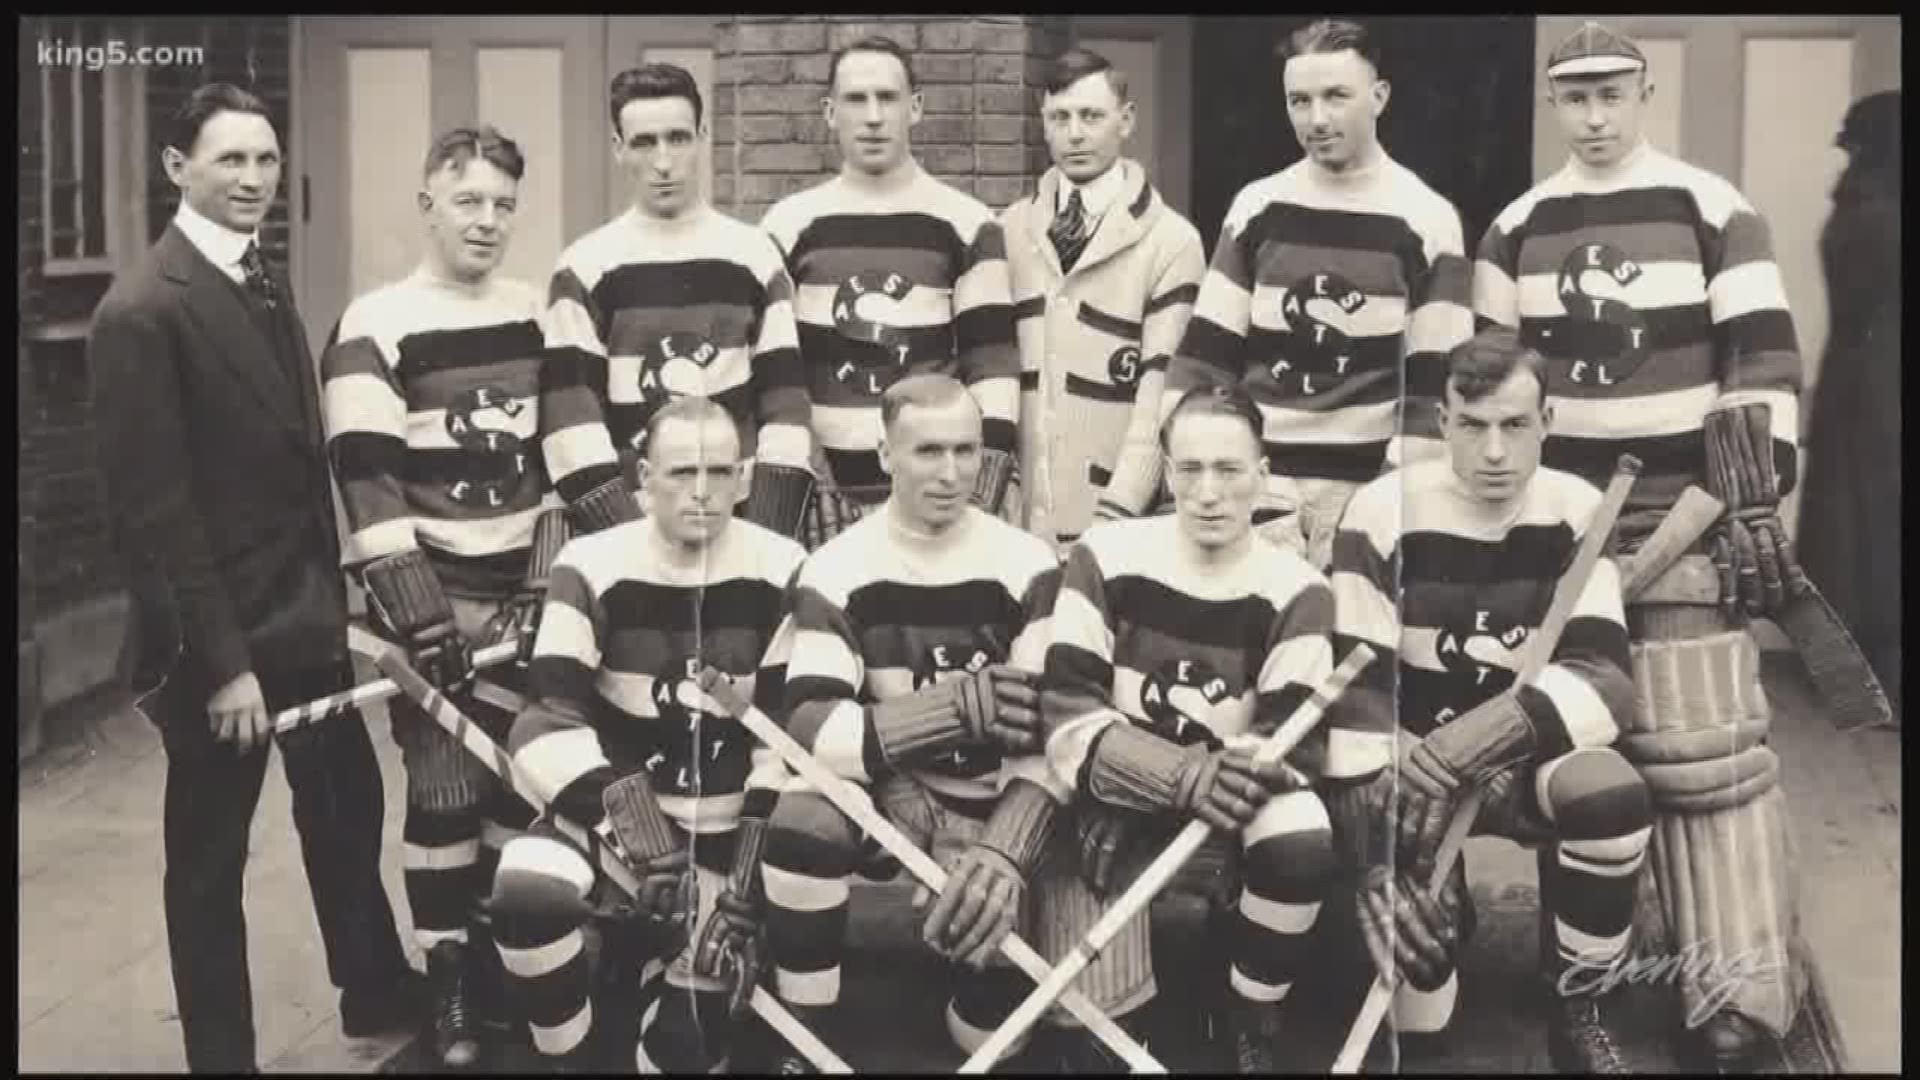 The Metropolitans were one of the finest professional sports teams in the city's history